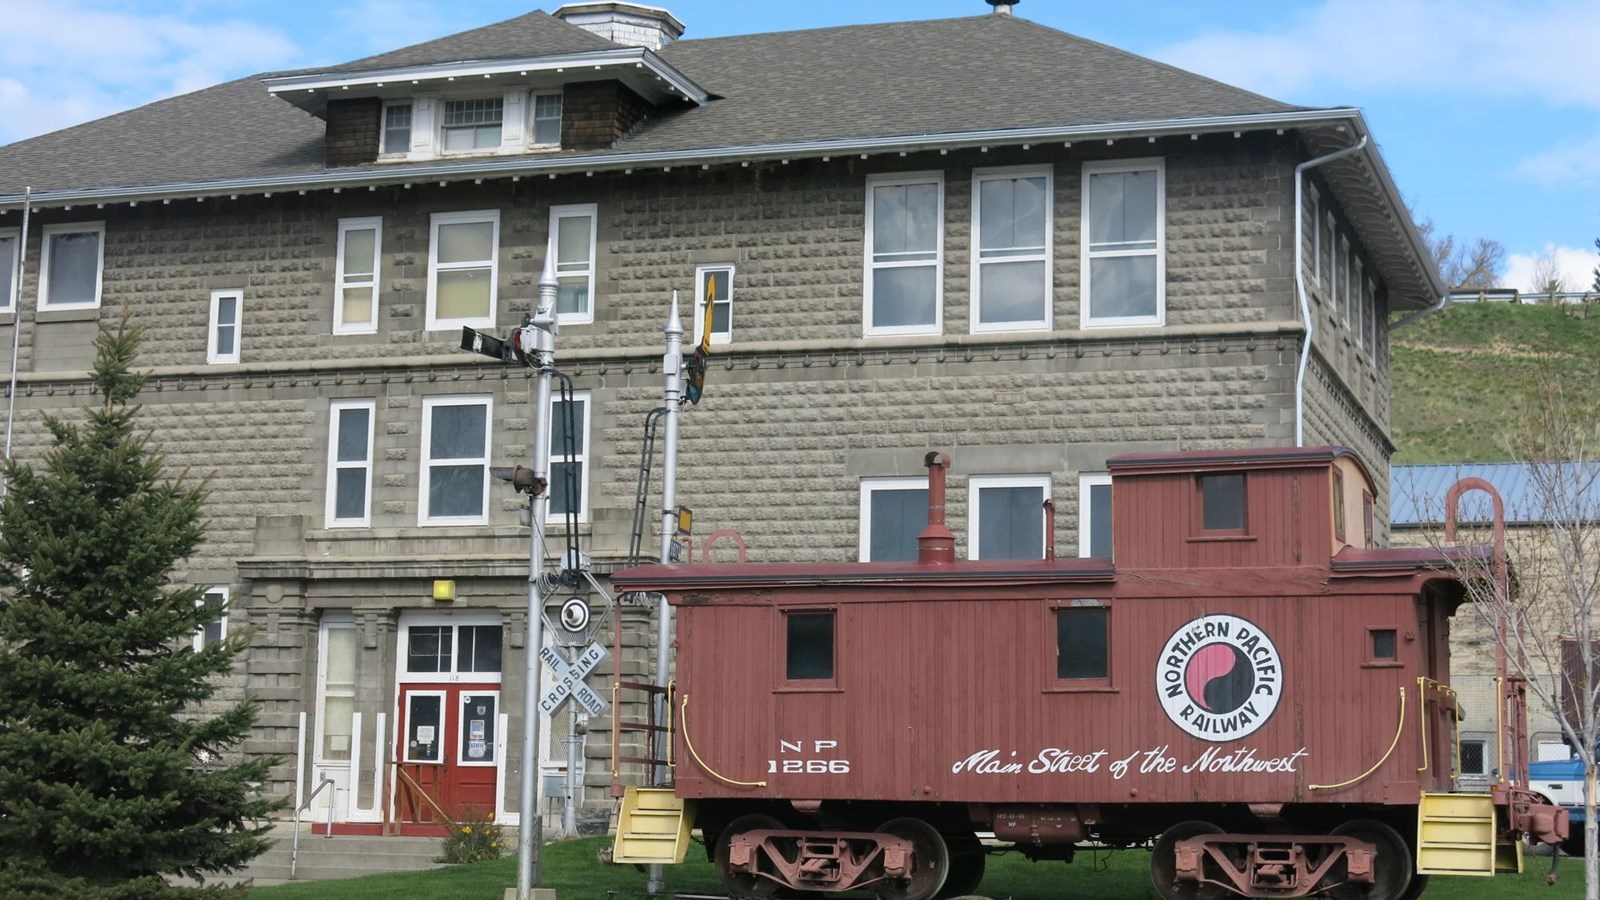 A three-story grey brick building with a red train caboose and a railway crossing sign in front..